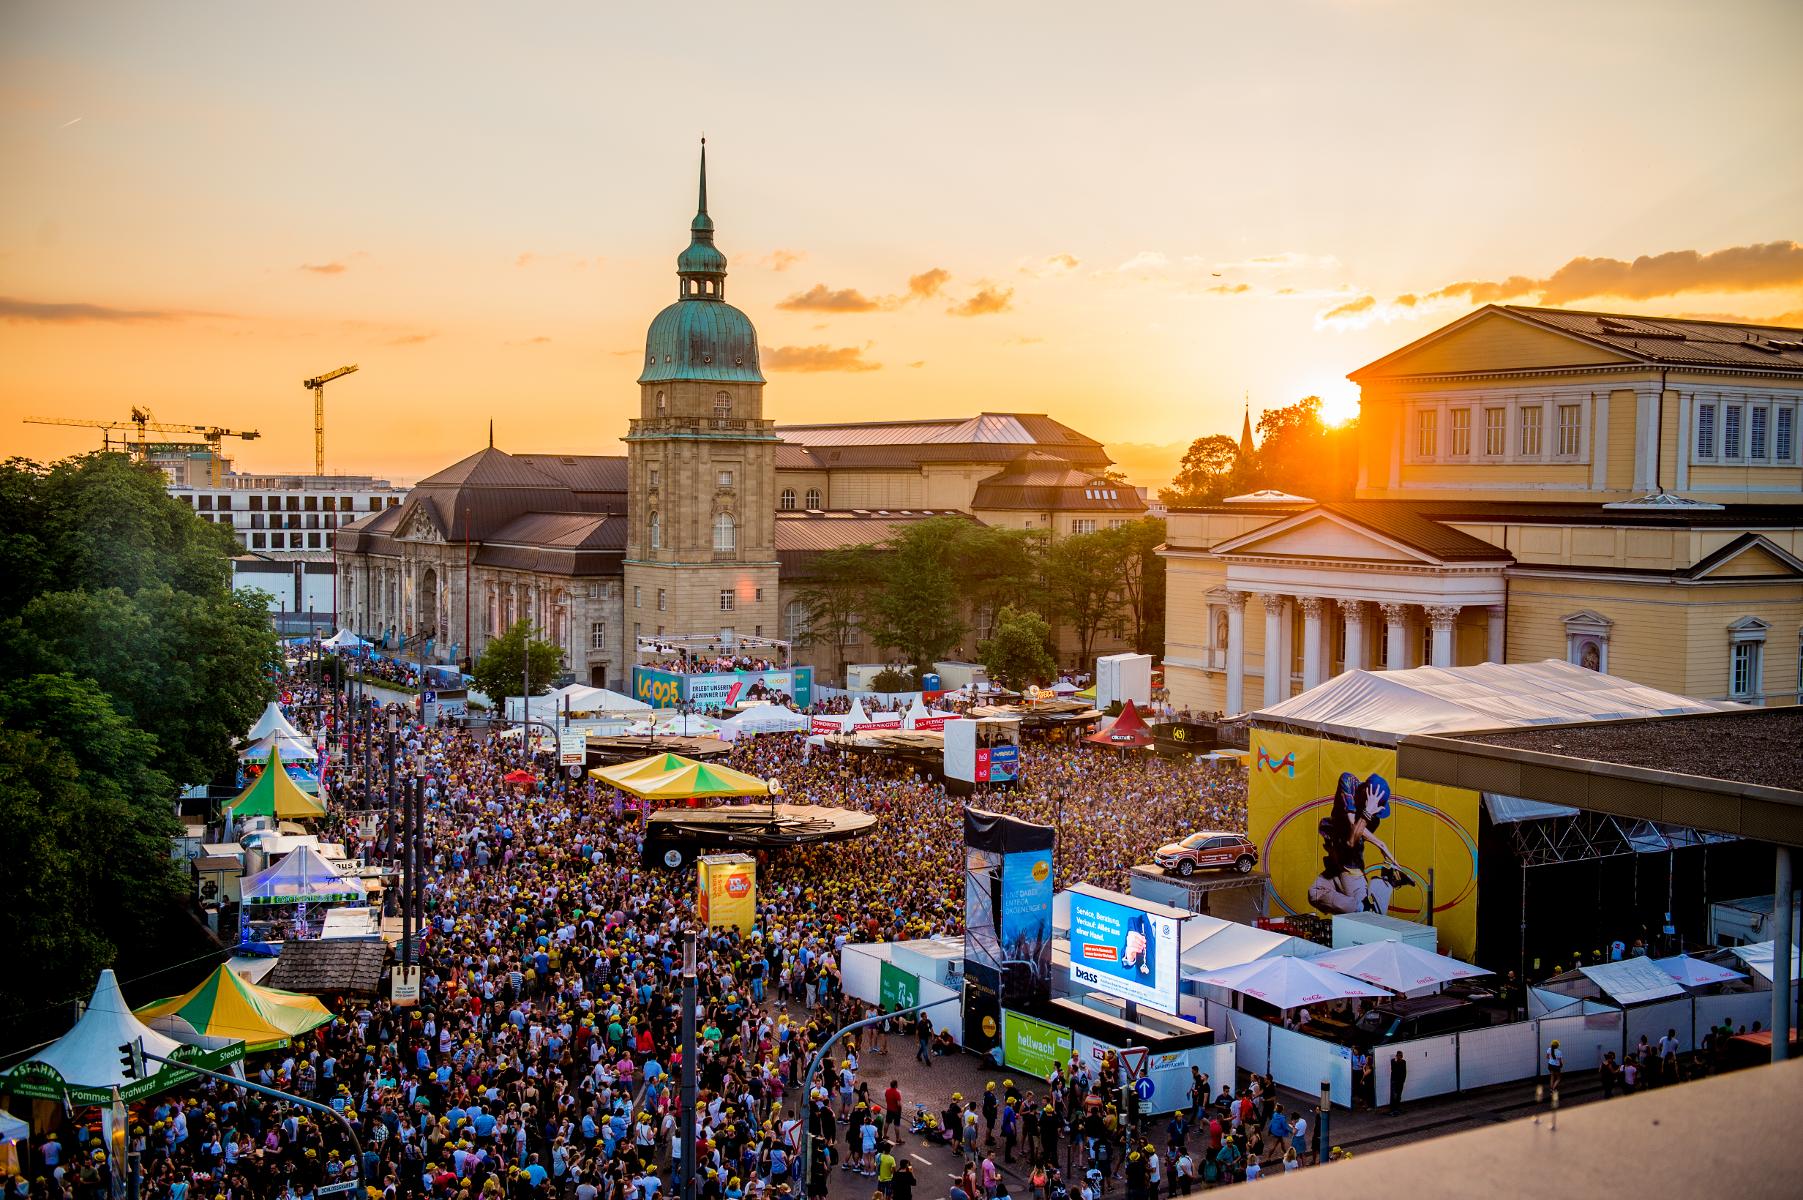 The Schlossgrabenfest has been held annually in Darmstadt‘s city centre since 1999 and is Hesse‘s largest music festival.